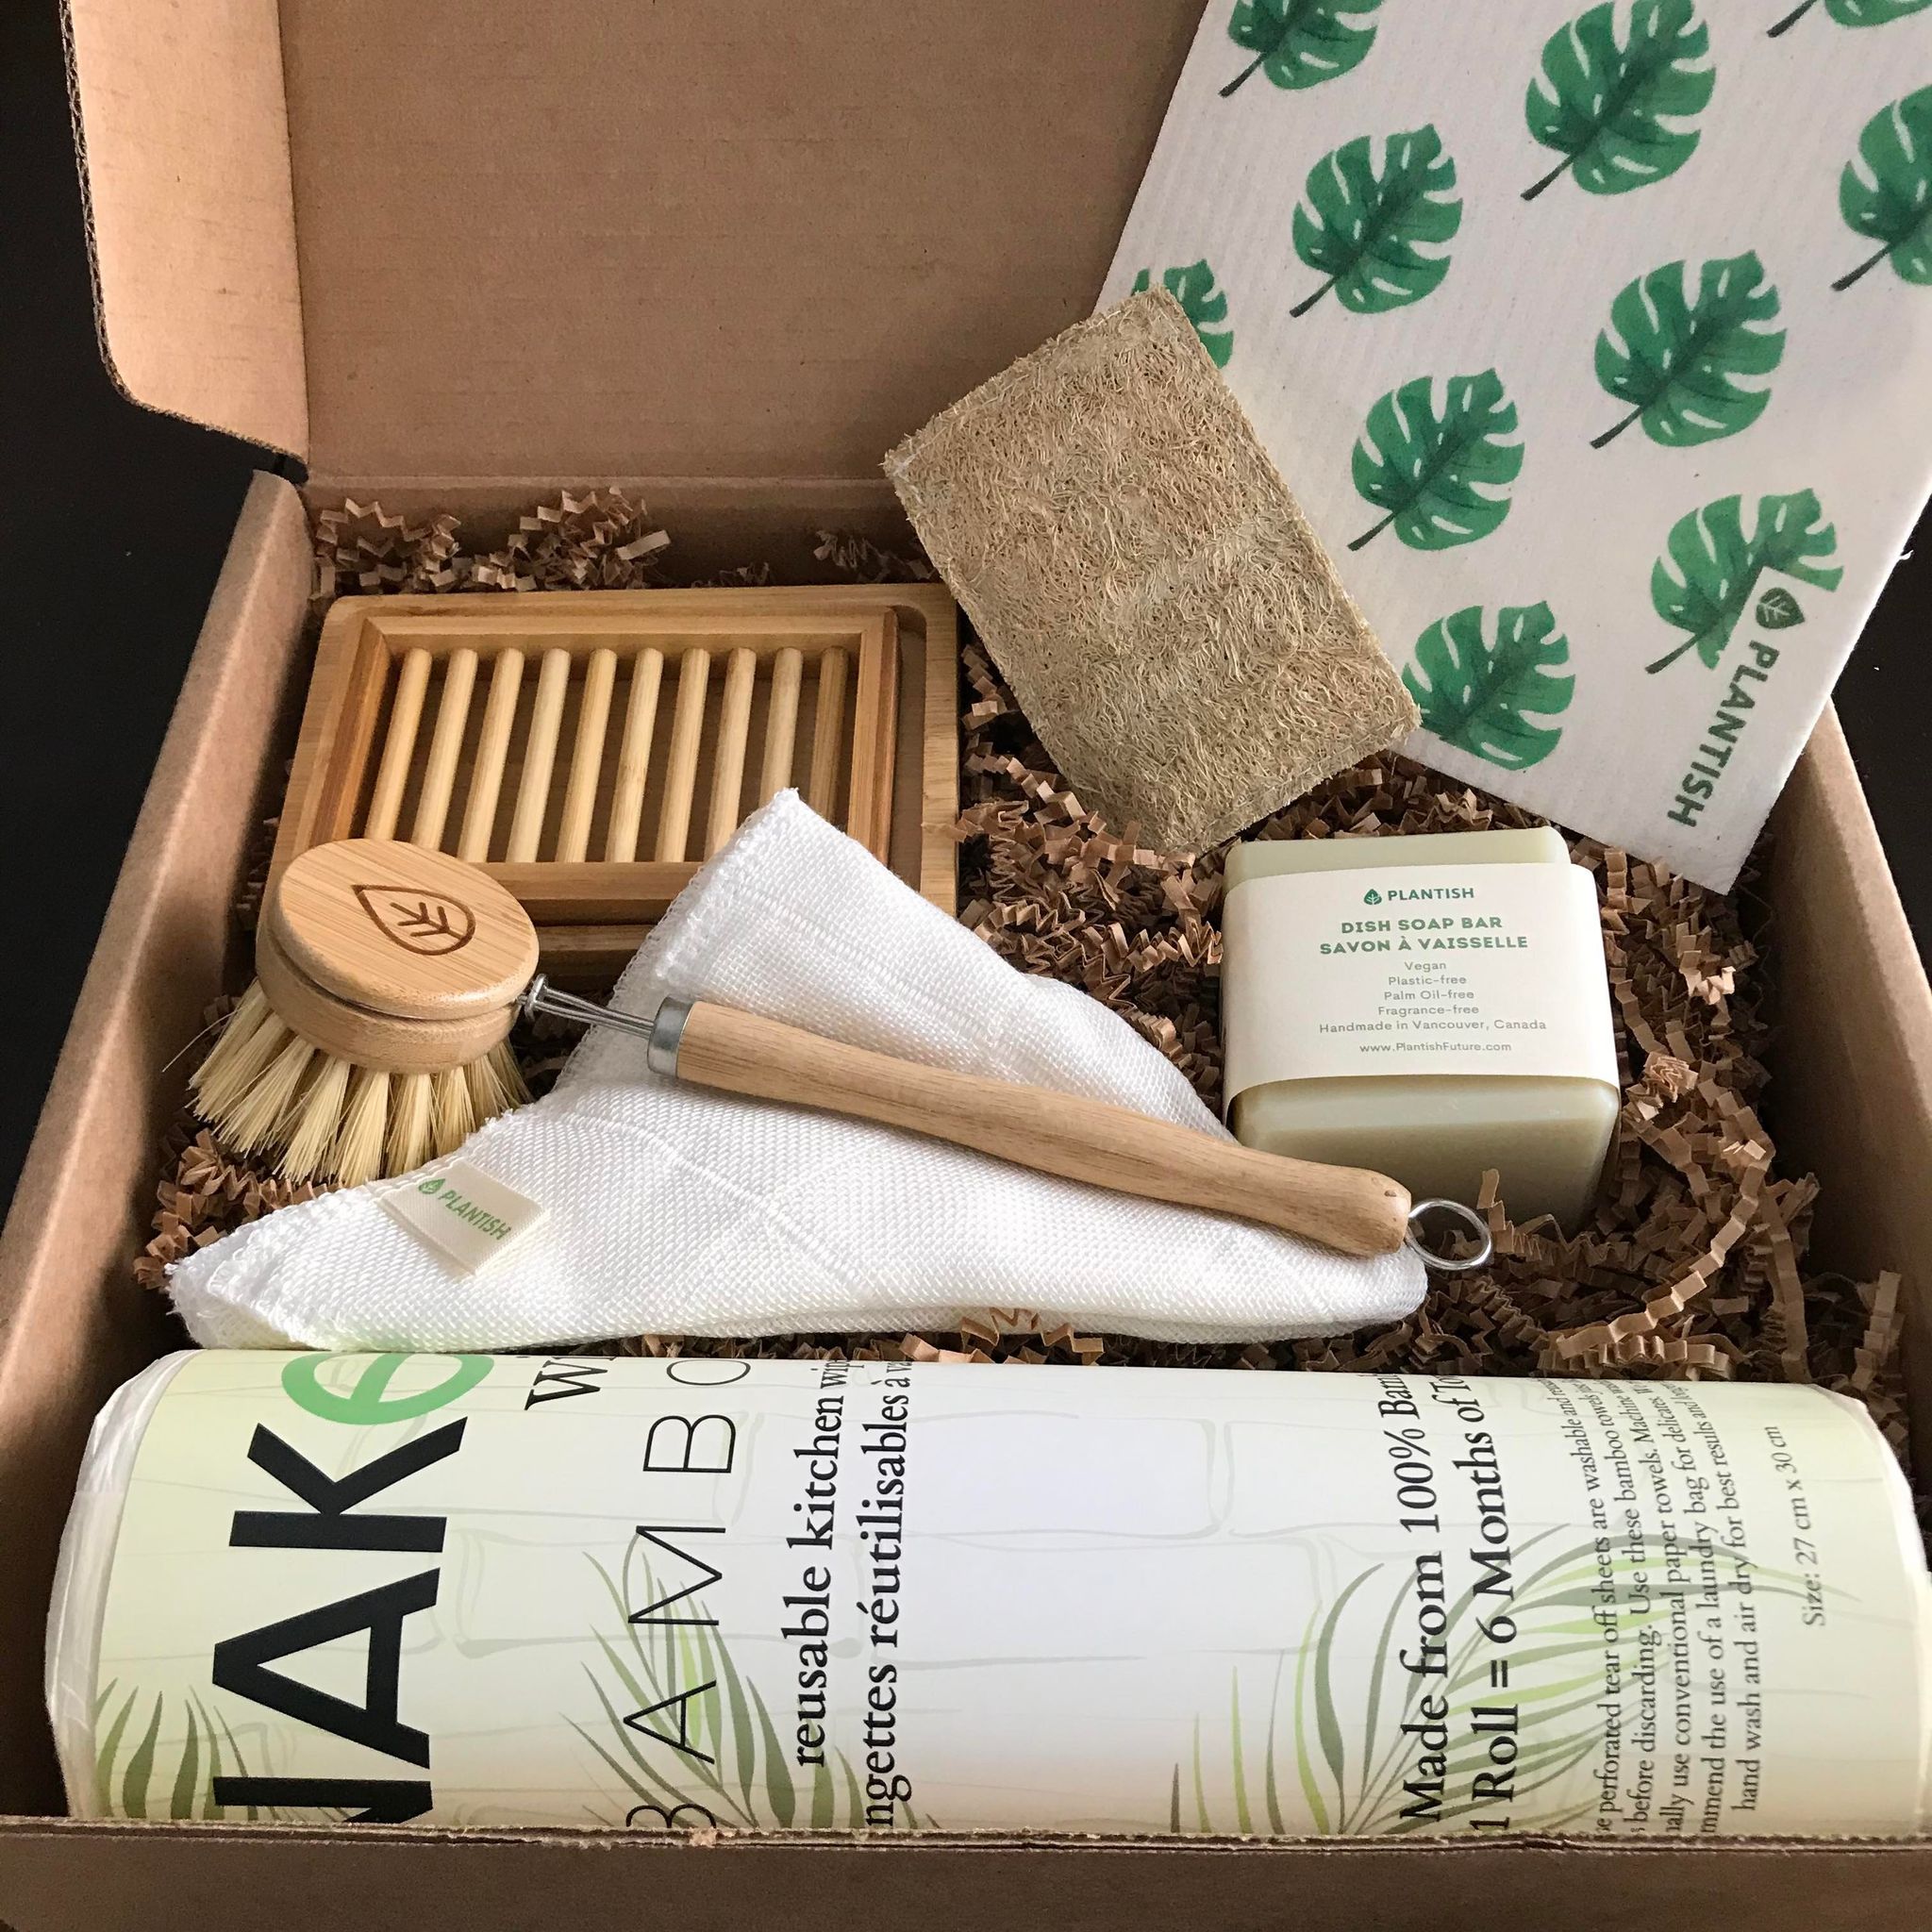 Each zero waste kitchen gift set includes a dual layer bamboo soap dish, eco sponge, Swedish dish cloth, sisal dish brush, bamboo cloth, dish soap bar and a roll of bamboo NakedWipes.